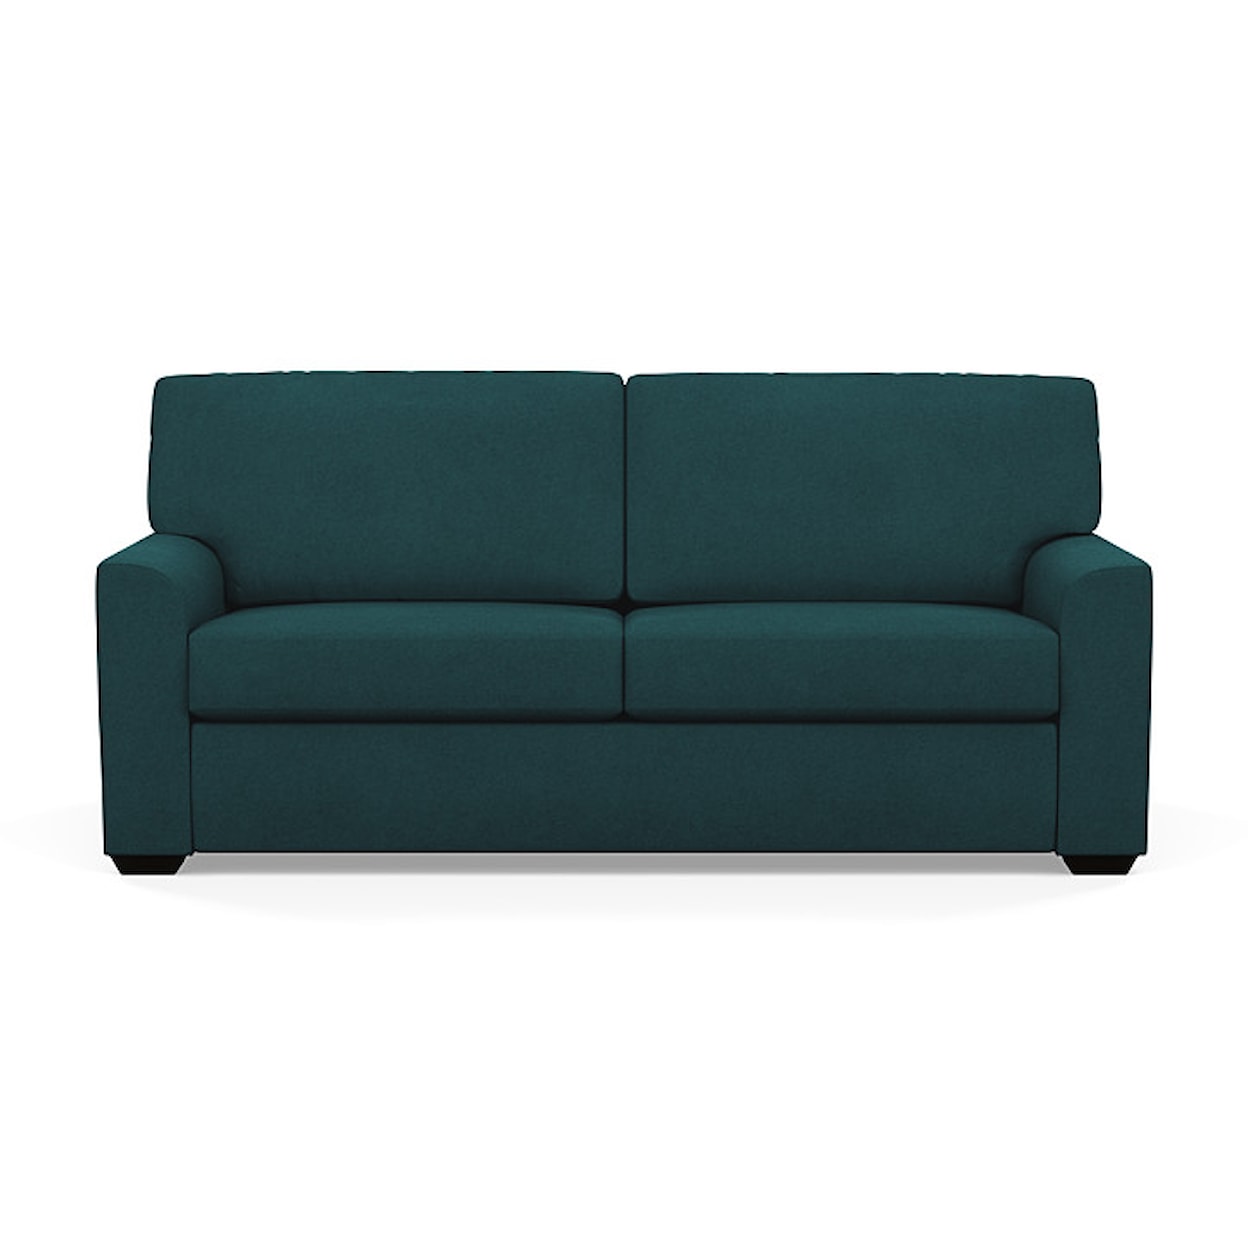 American Leather Klein Queen Sofabed